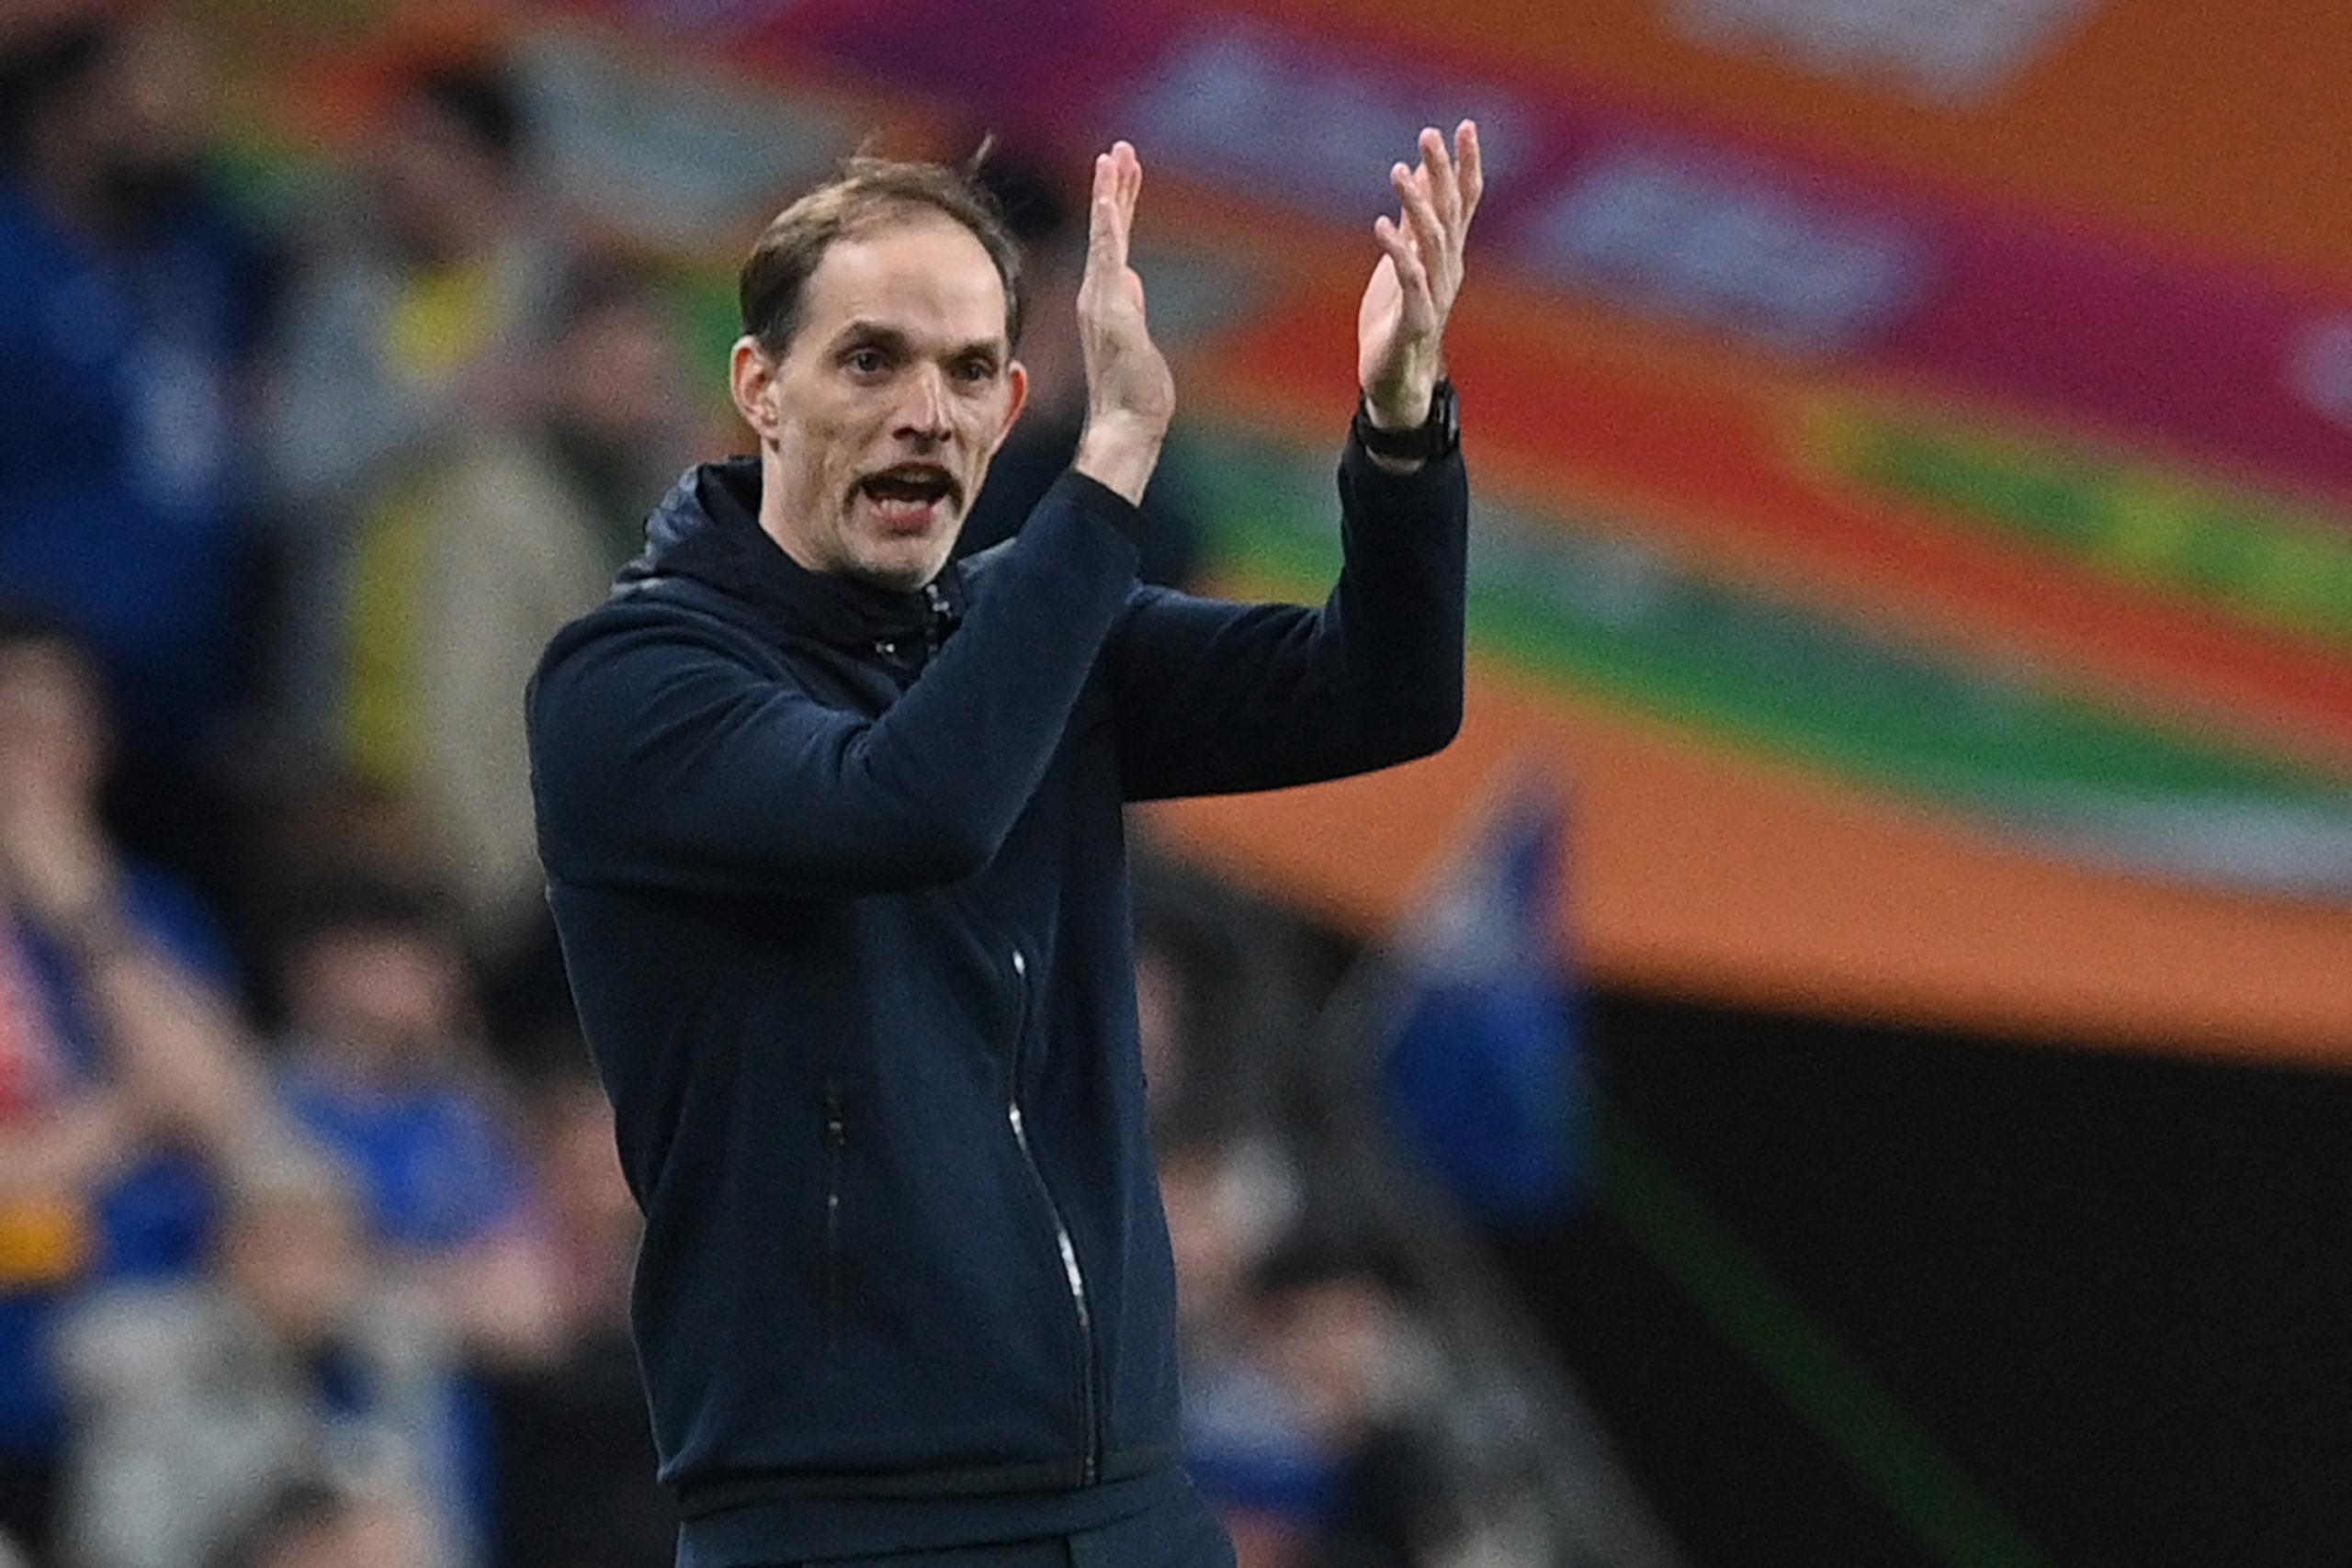 Tuchel shares what he told Chelsea's players in team huddle on Wembley pitch after they lost on penalties